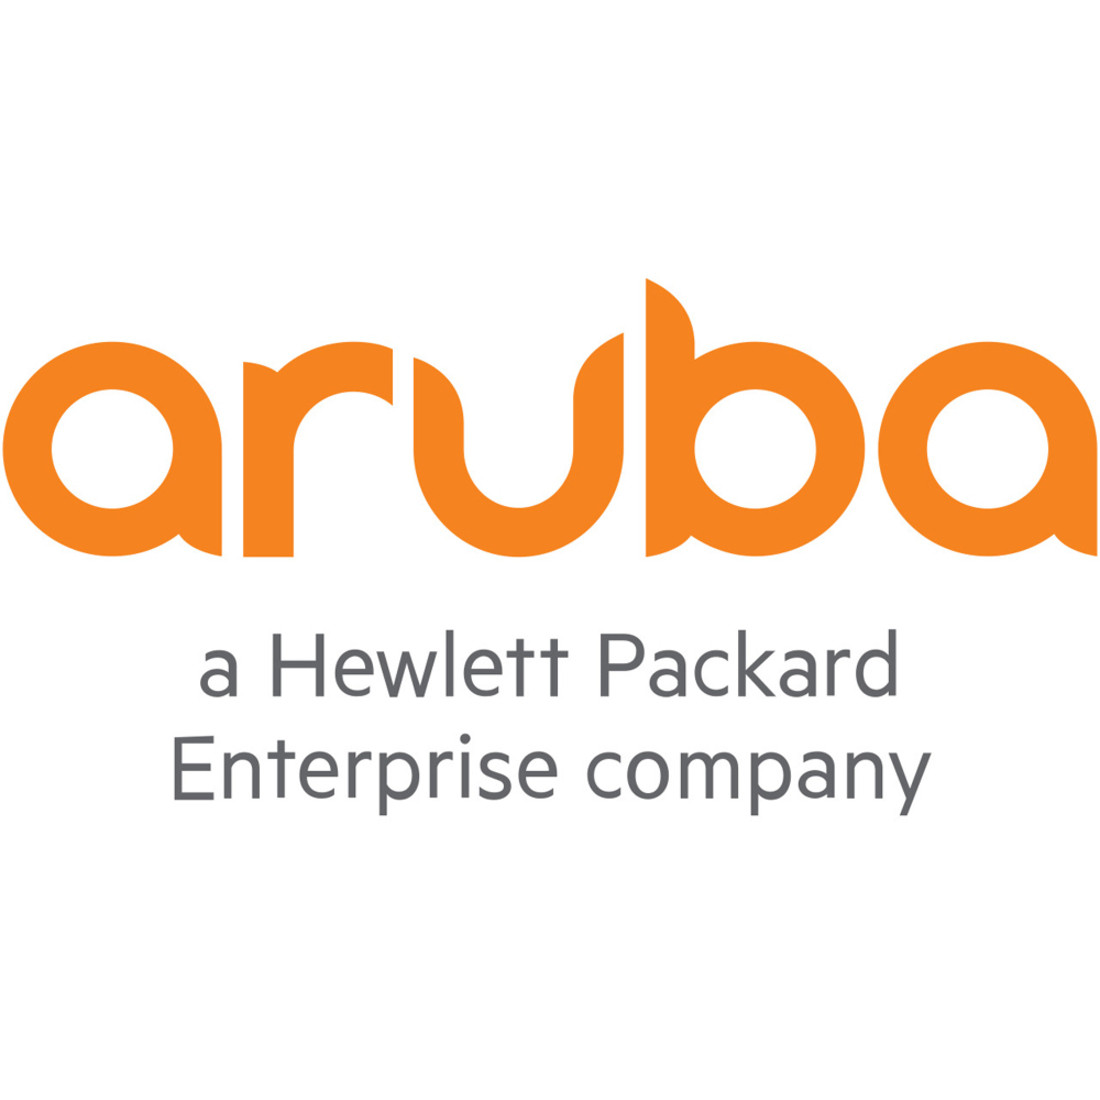 Aruba Central FoundationSubscription License1 Chassis10 YearElectronic R3K07AAE